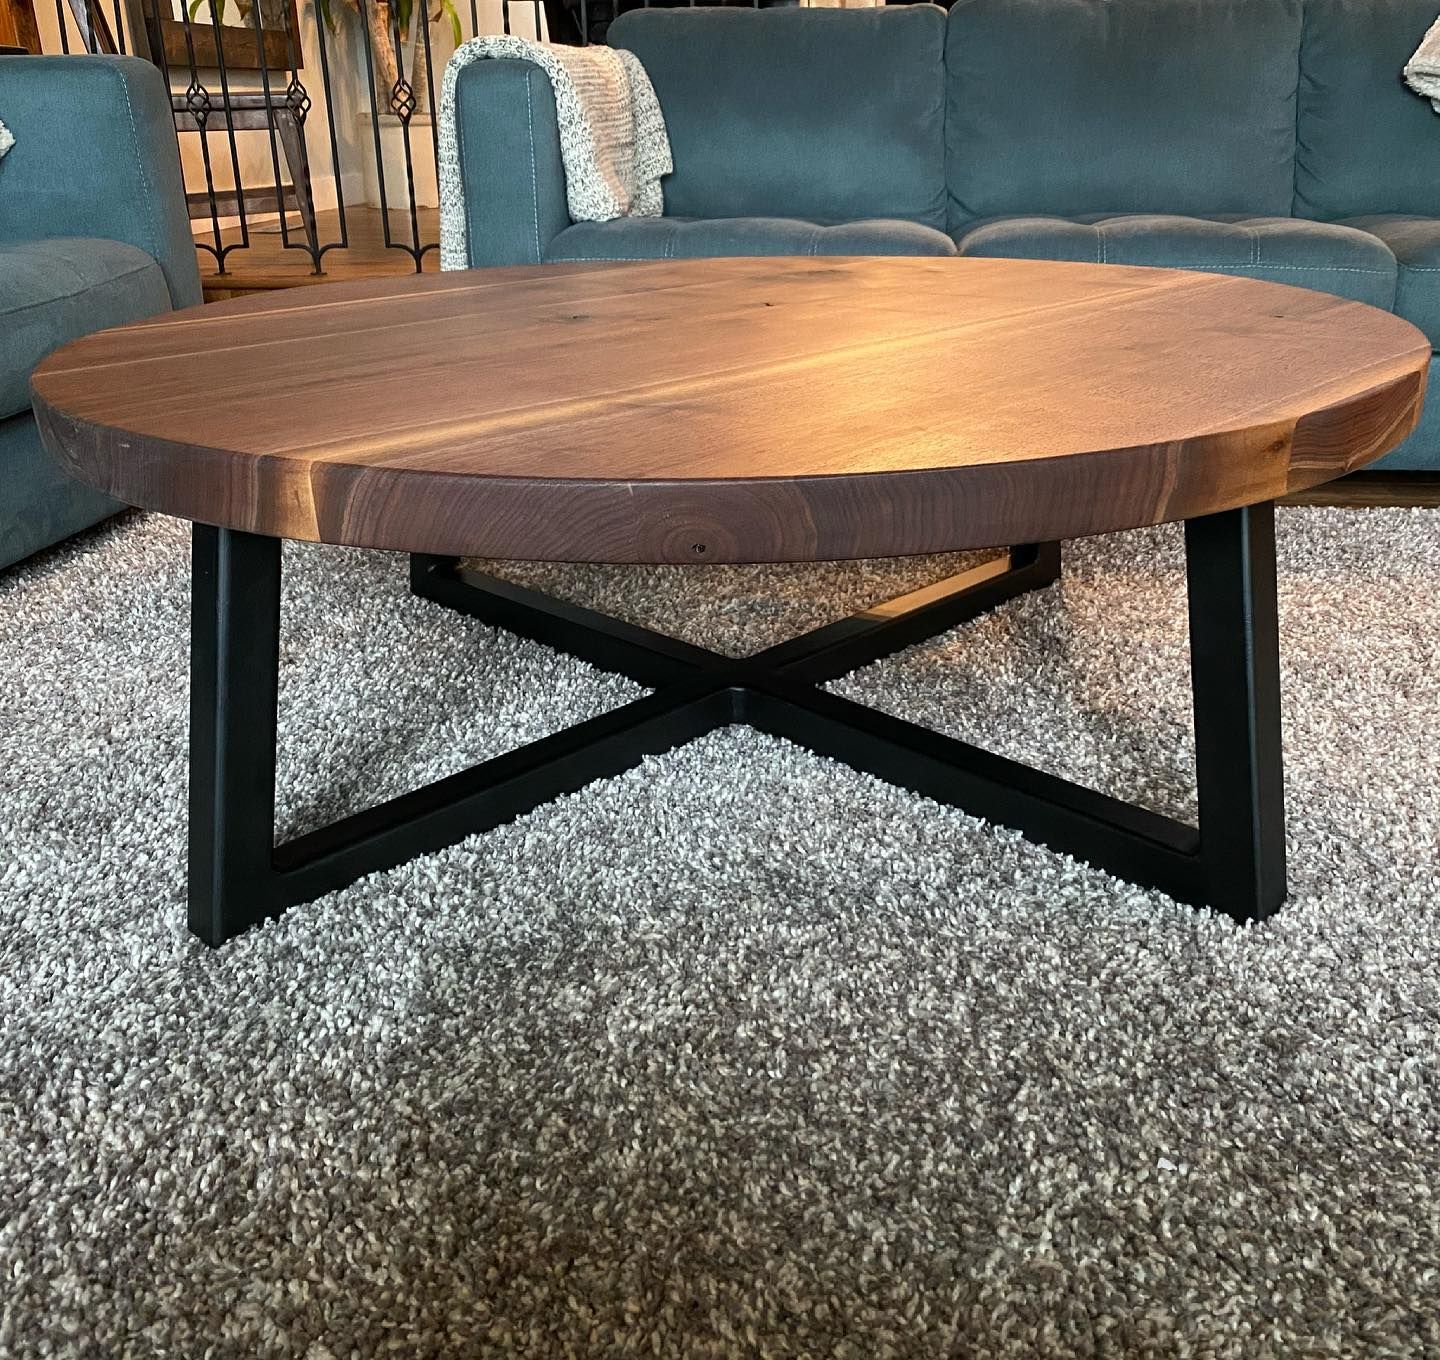 4ft Round Black Walnut Coffee Table – Woodify Canada Intended For Walnut Coffee Tables (Gallery 19 of 20)